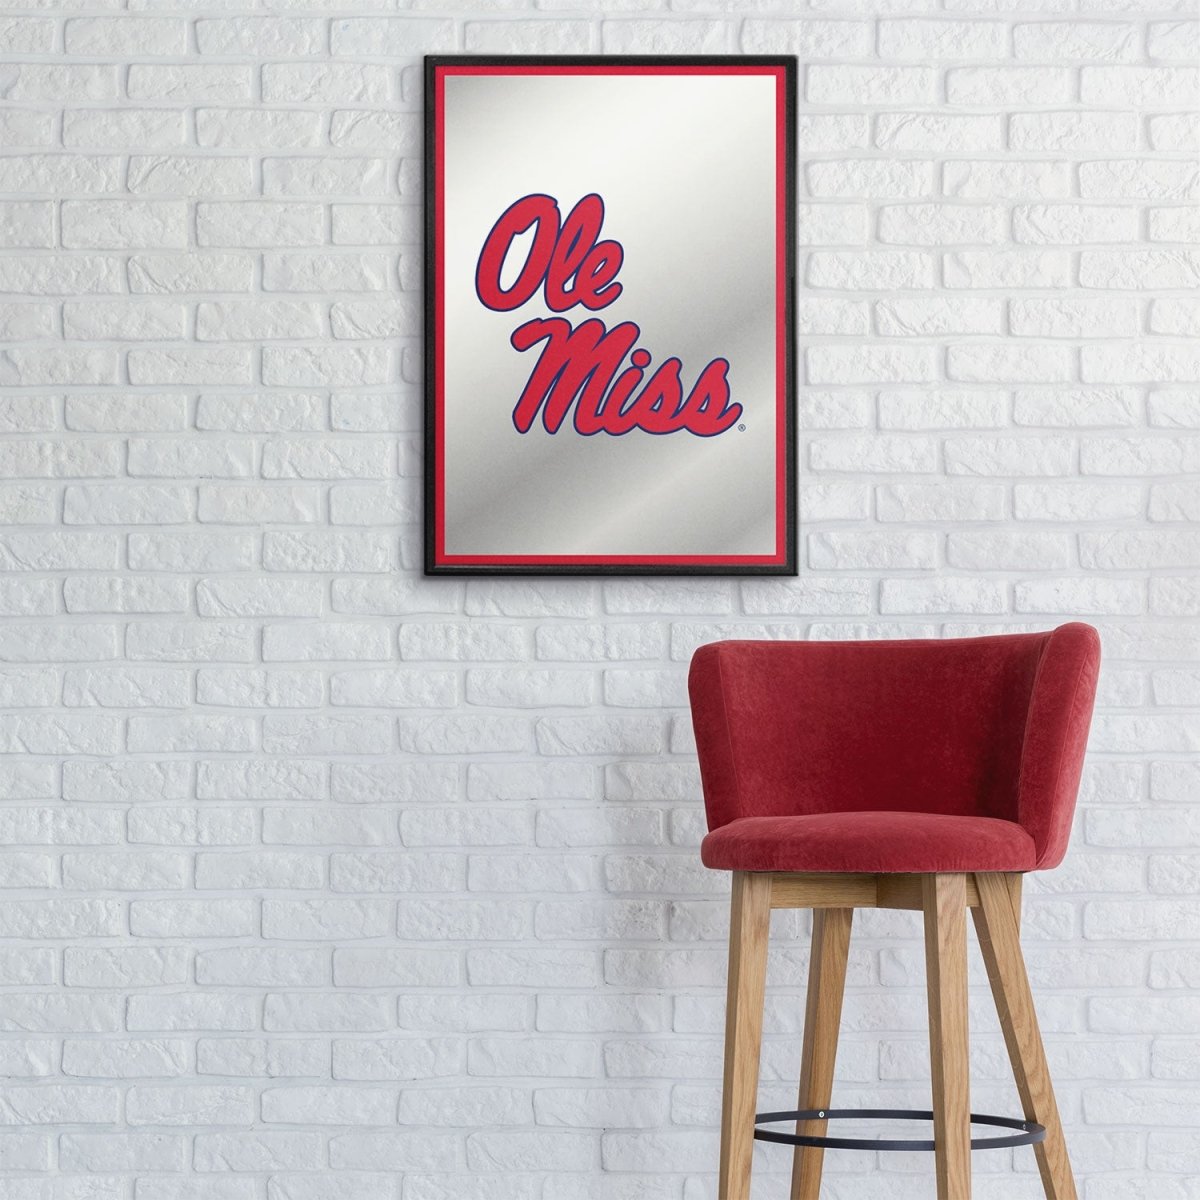 Ole Miss Rebels: Stacked Logo - Framed Mirrored Wall Sign - The Fan-Brand